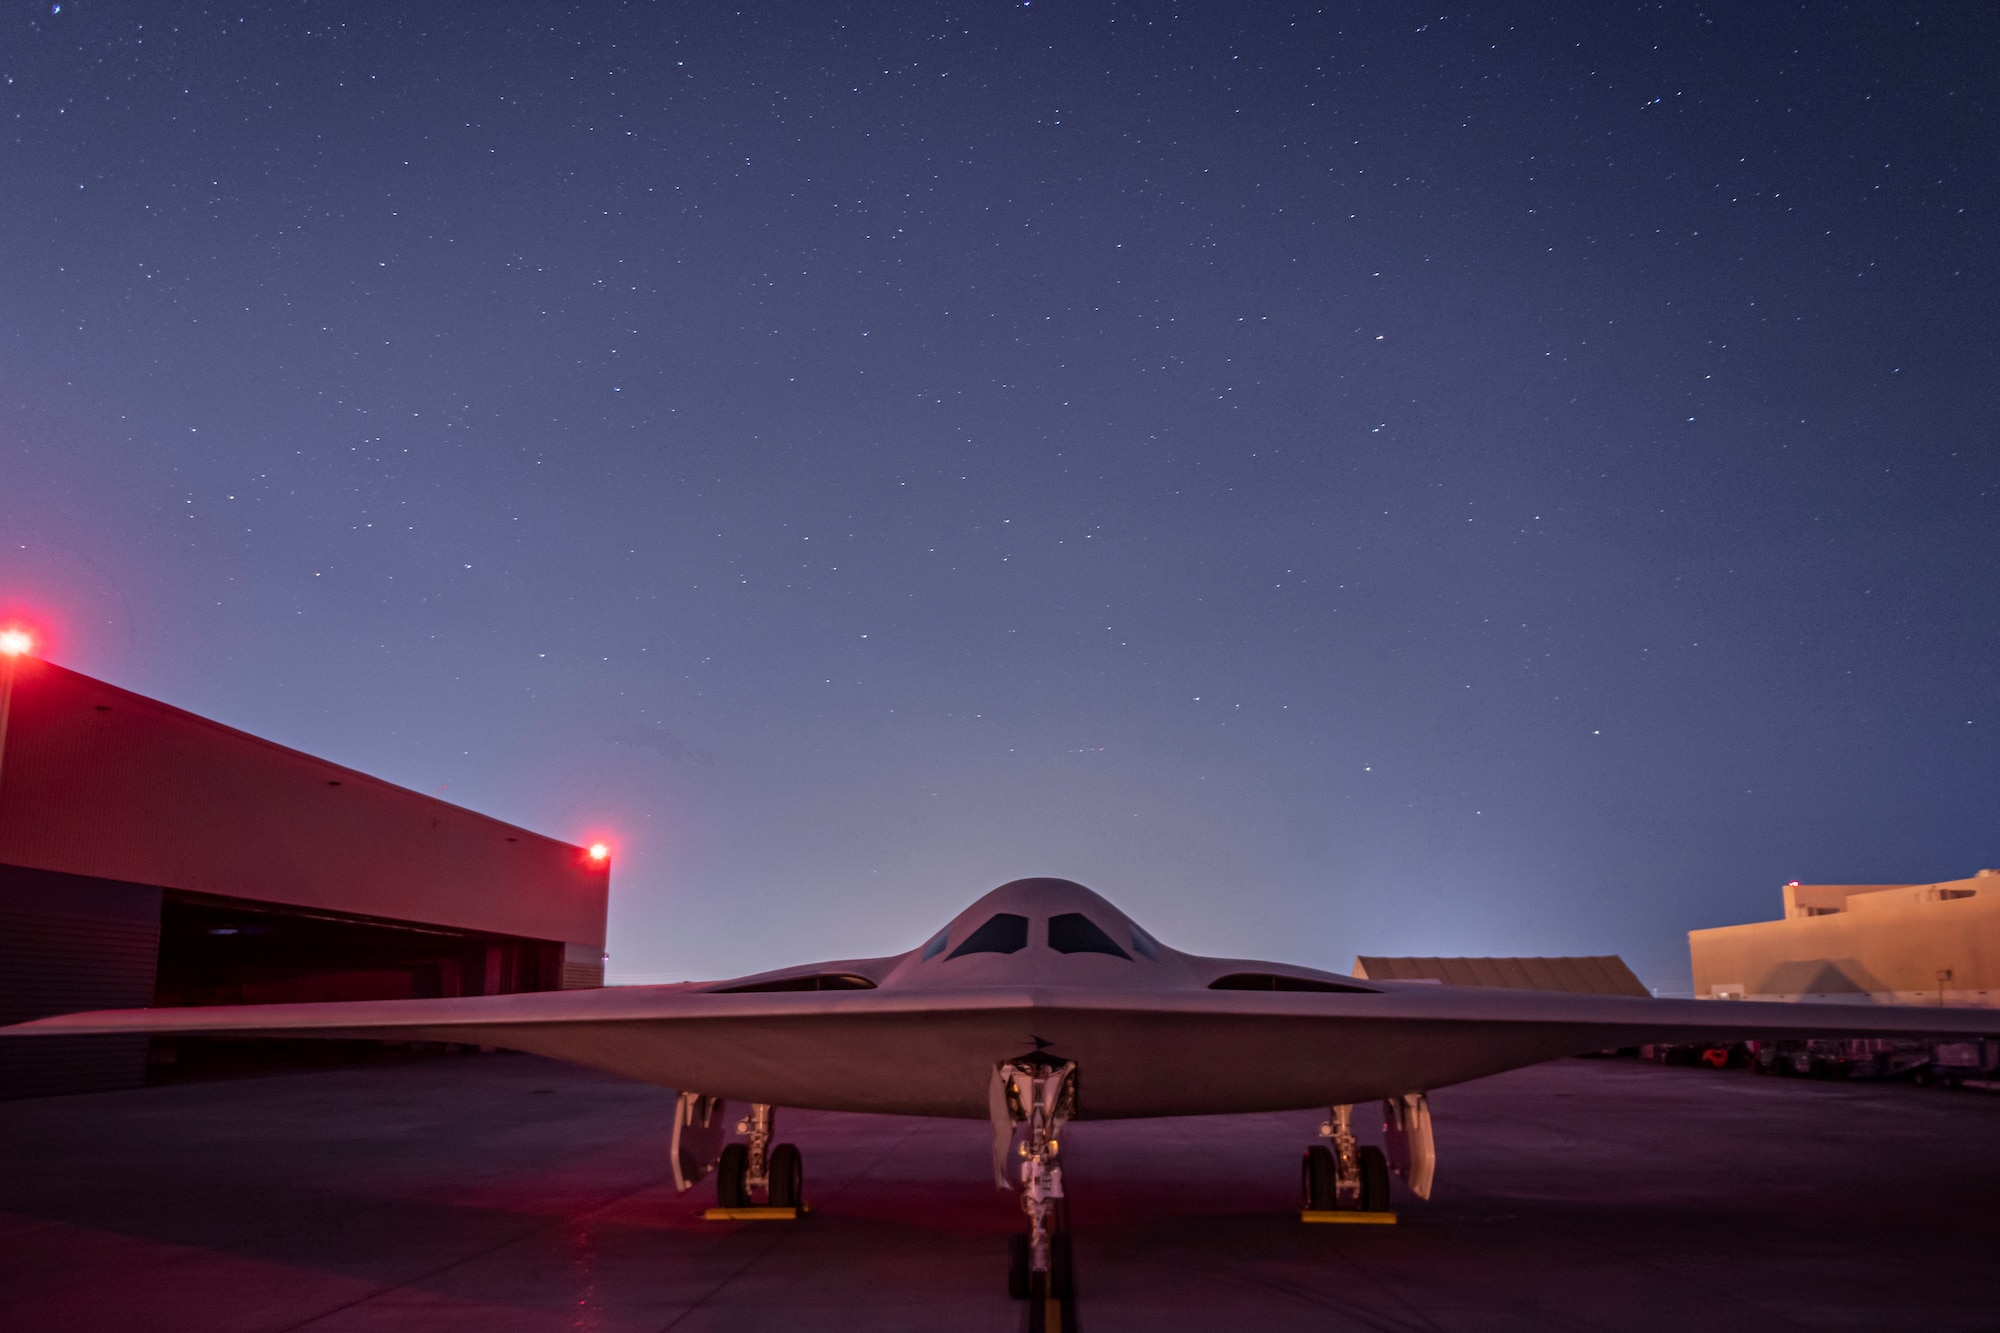 B-21 Raider makes public debut; will become backbone of Air Force's bomber  fleet > Air Force > Article Display